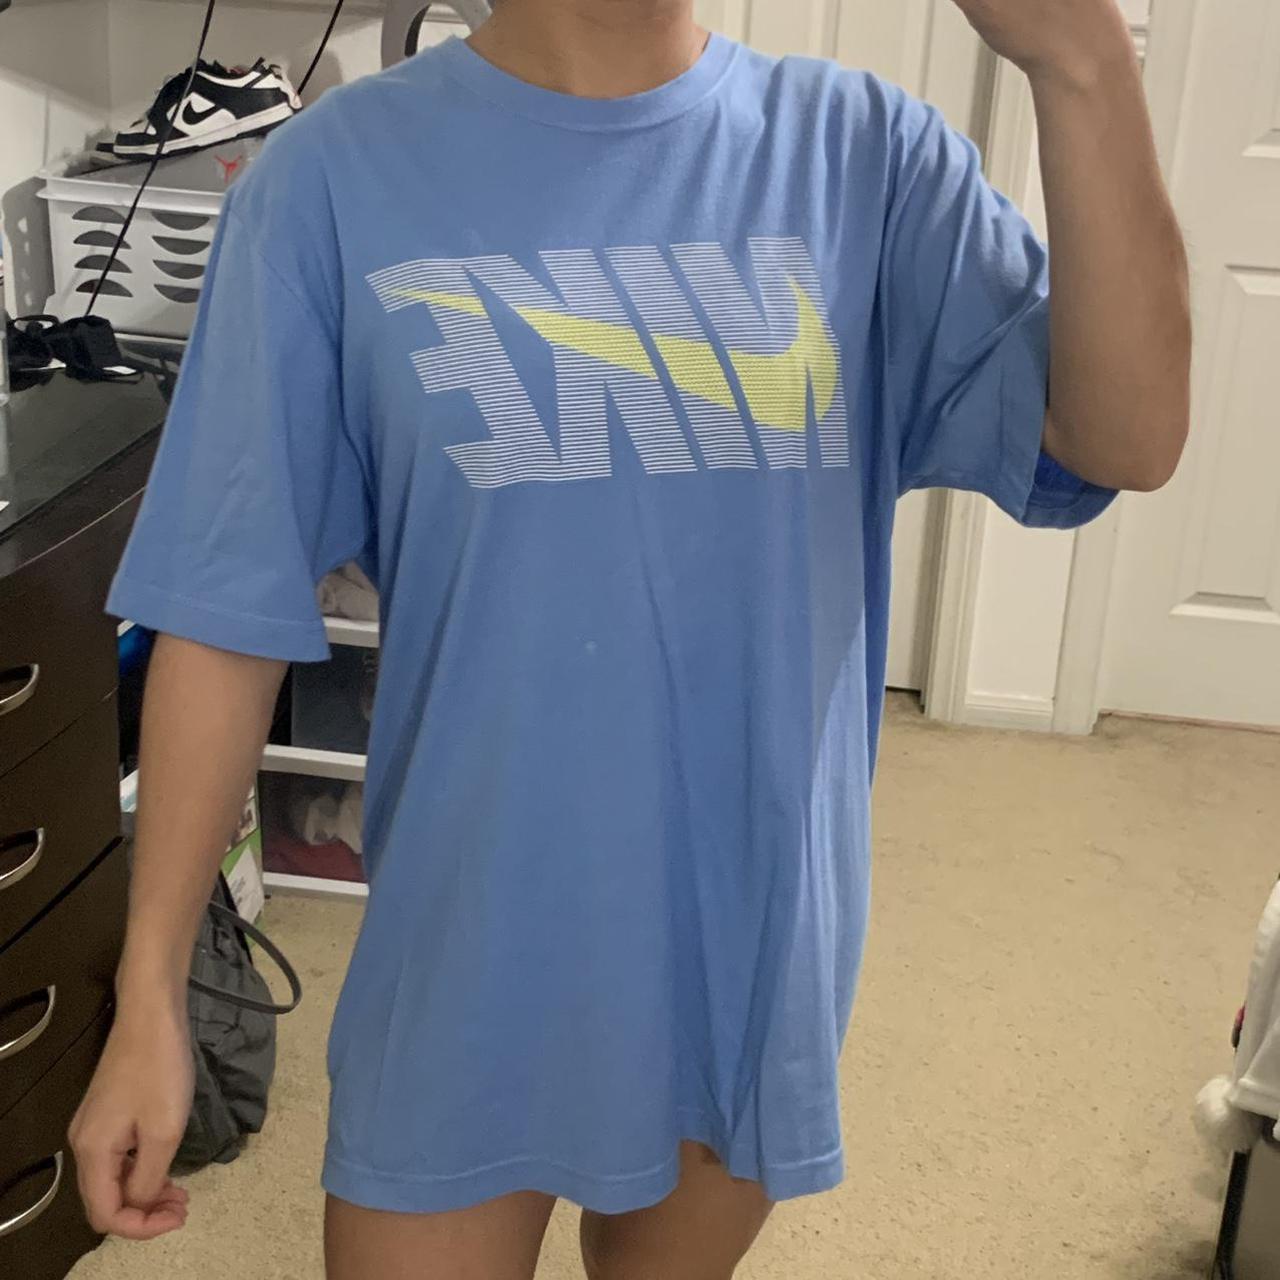 Nike vintage regular fit t shirt (Don’t have right